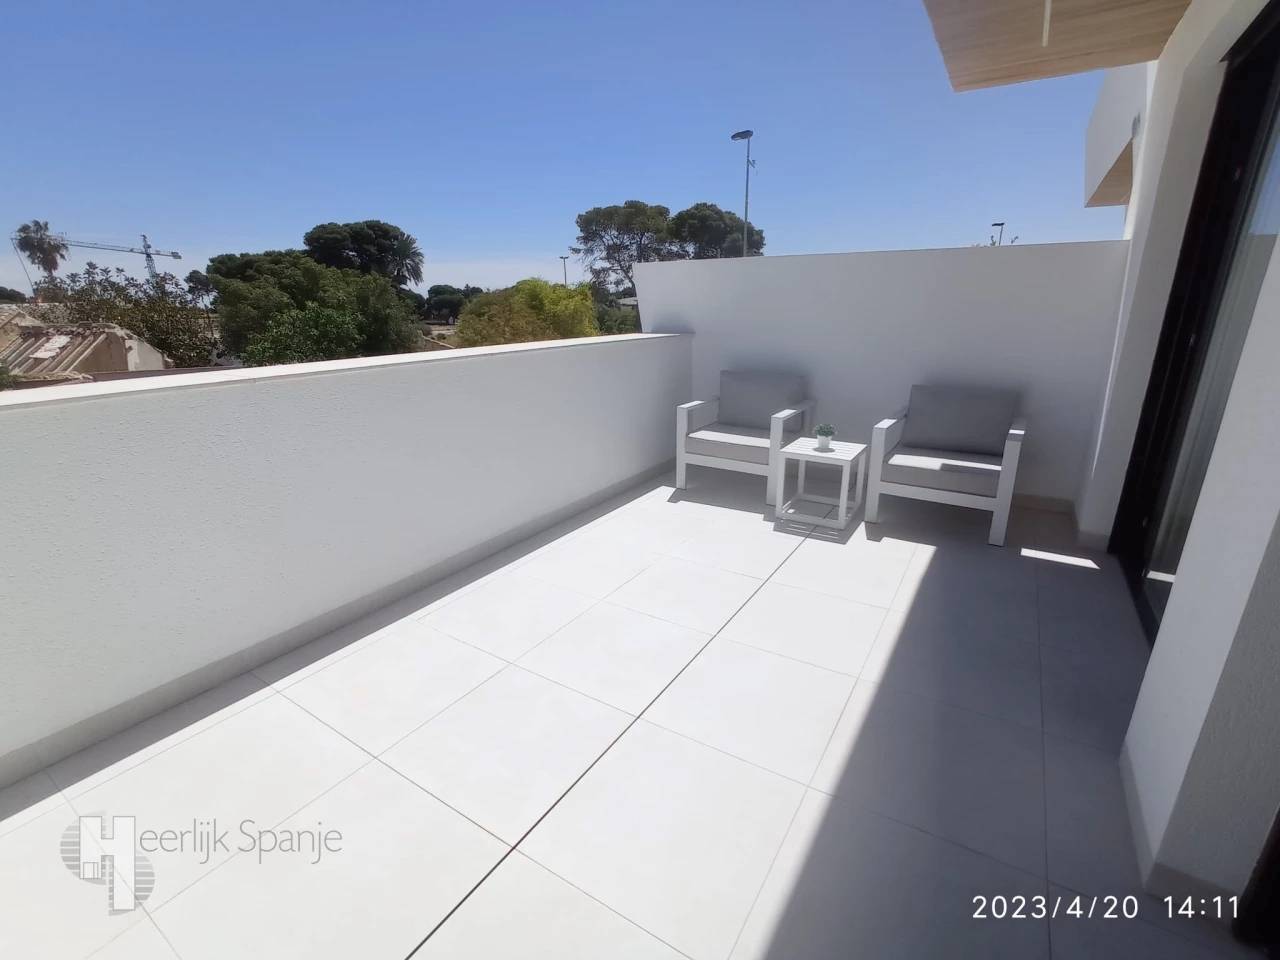 BEAUTIFUL 3 BEDROOM HOUSE READY TO MOVE INTO IN SAN JAVIER